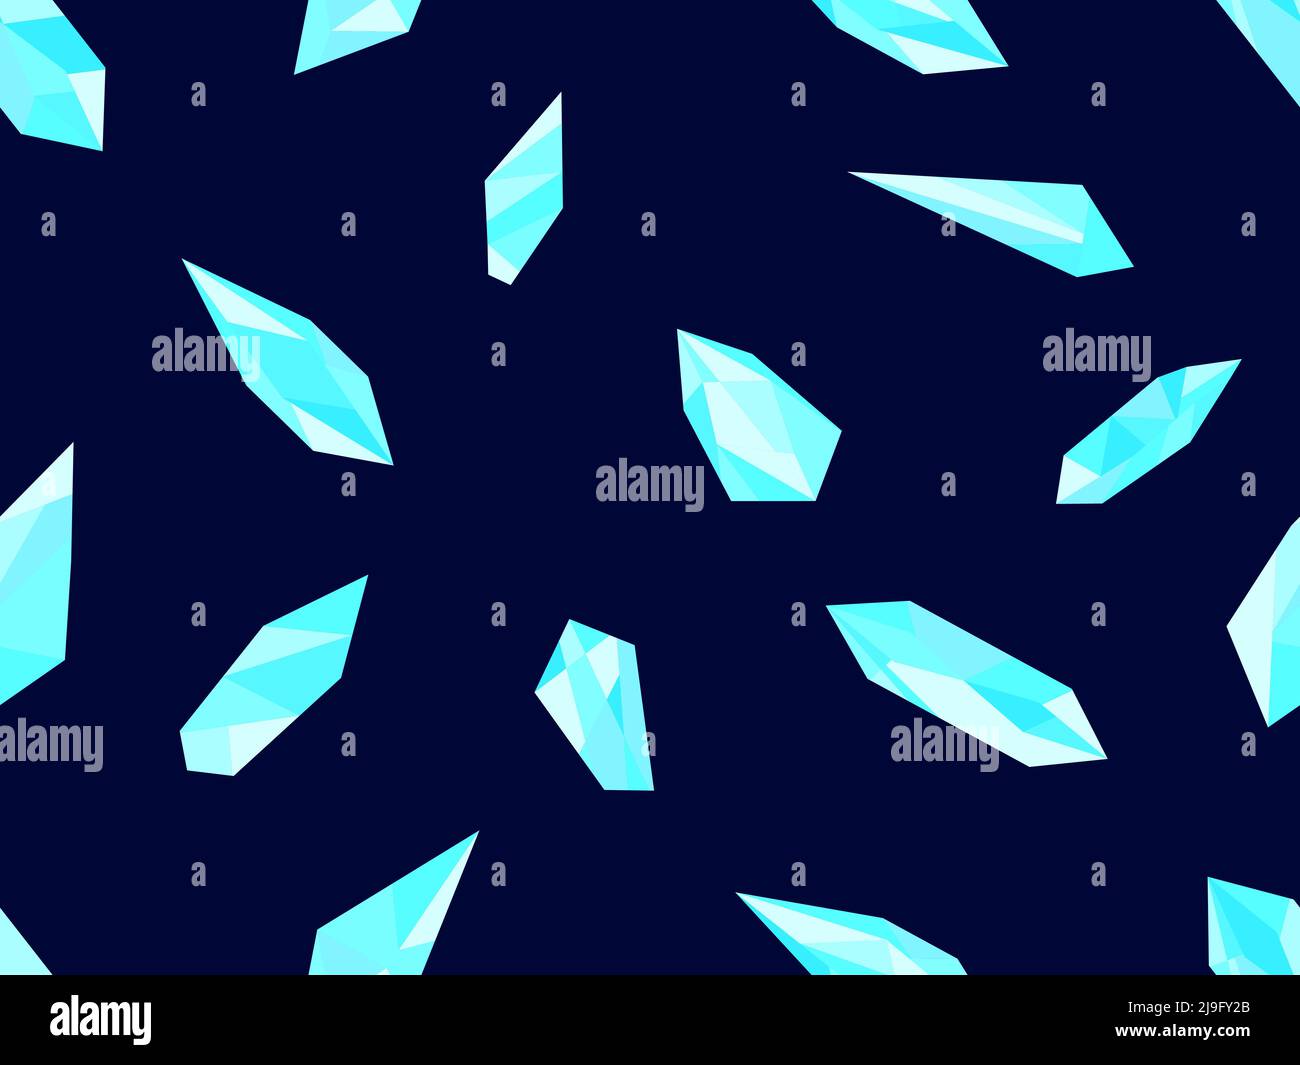 Blue crystals seamless pattern. Diamonds and brilliants. Raw minerals. Gems and jewelry gemstones design for advertising products, wraps and banners. Stock Vector